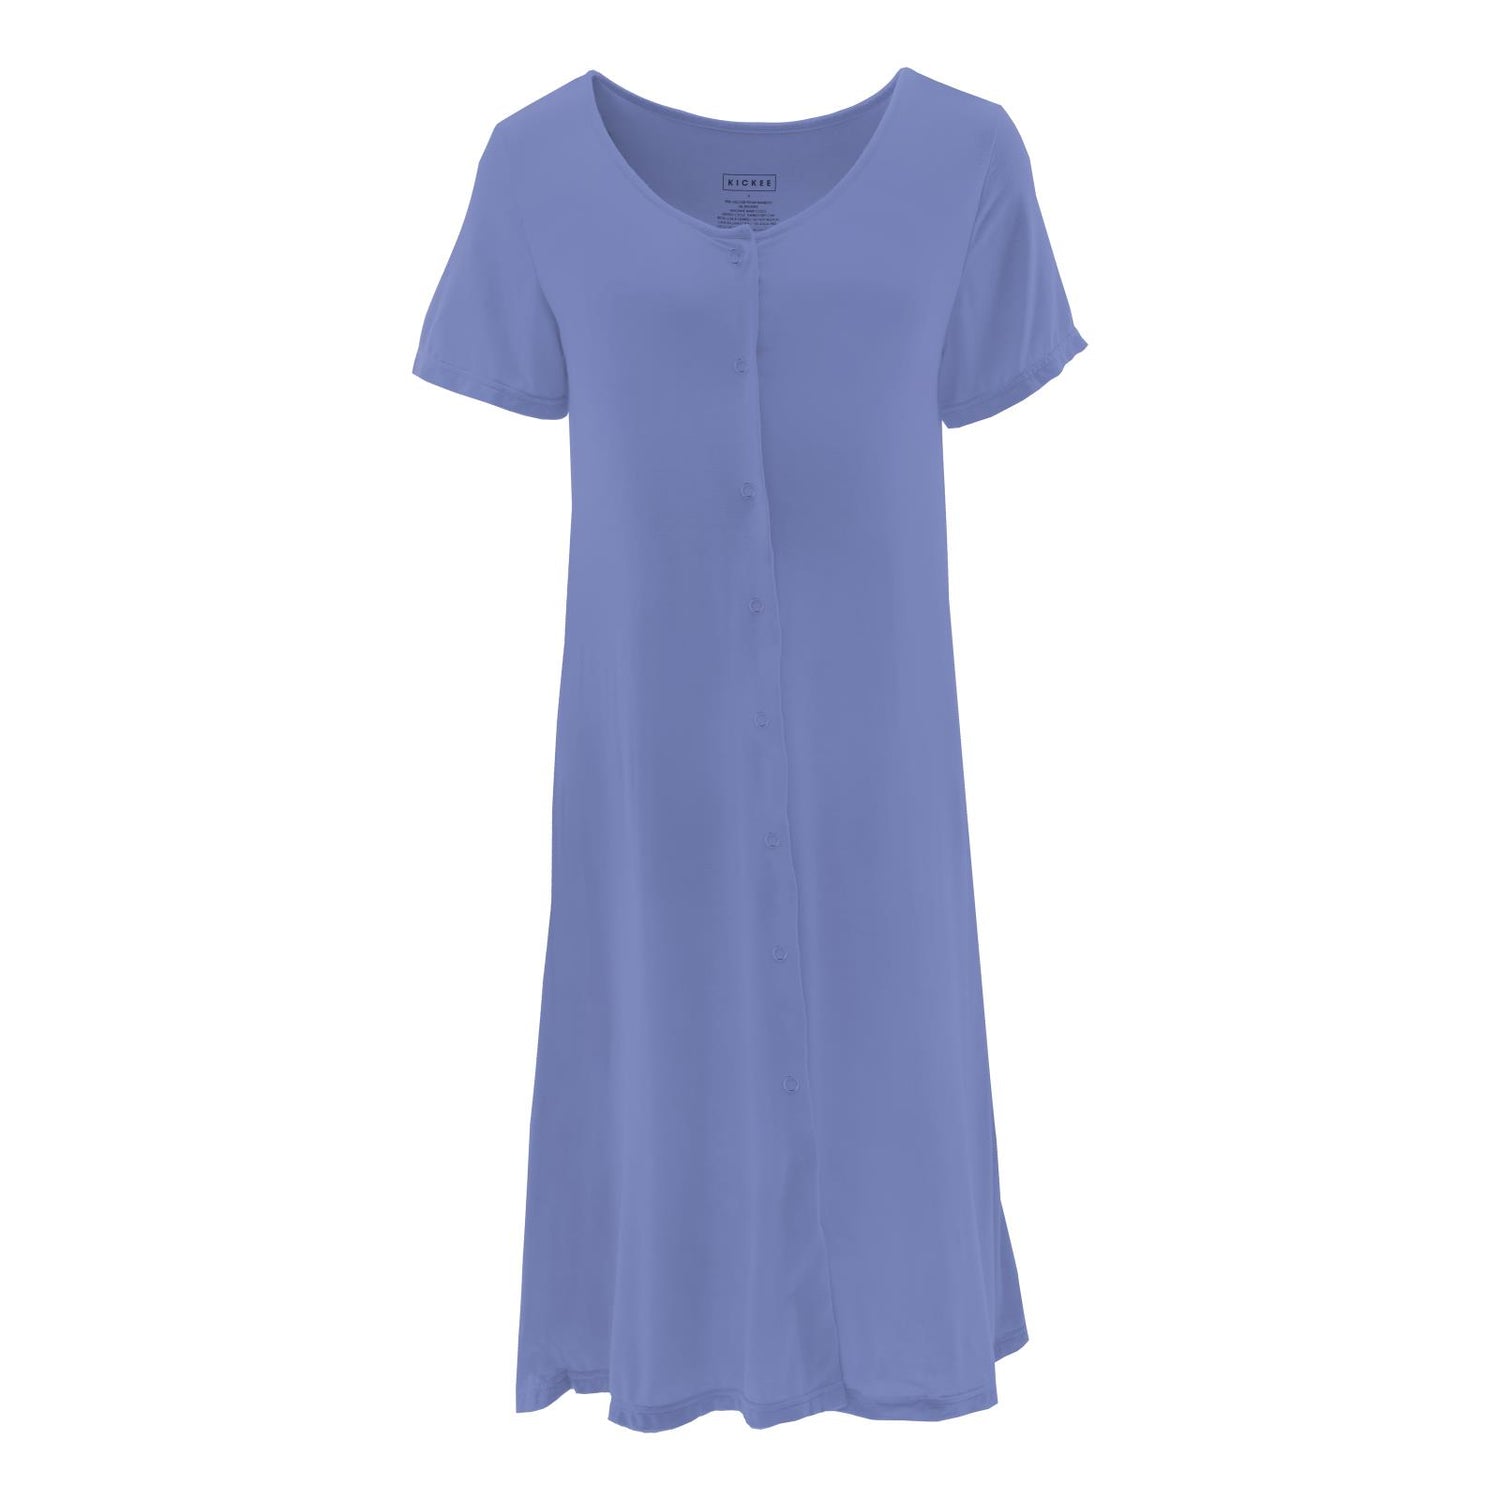 Women's Nursing Nightgown in Forget Me Not